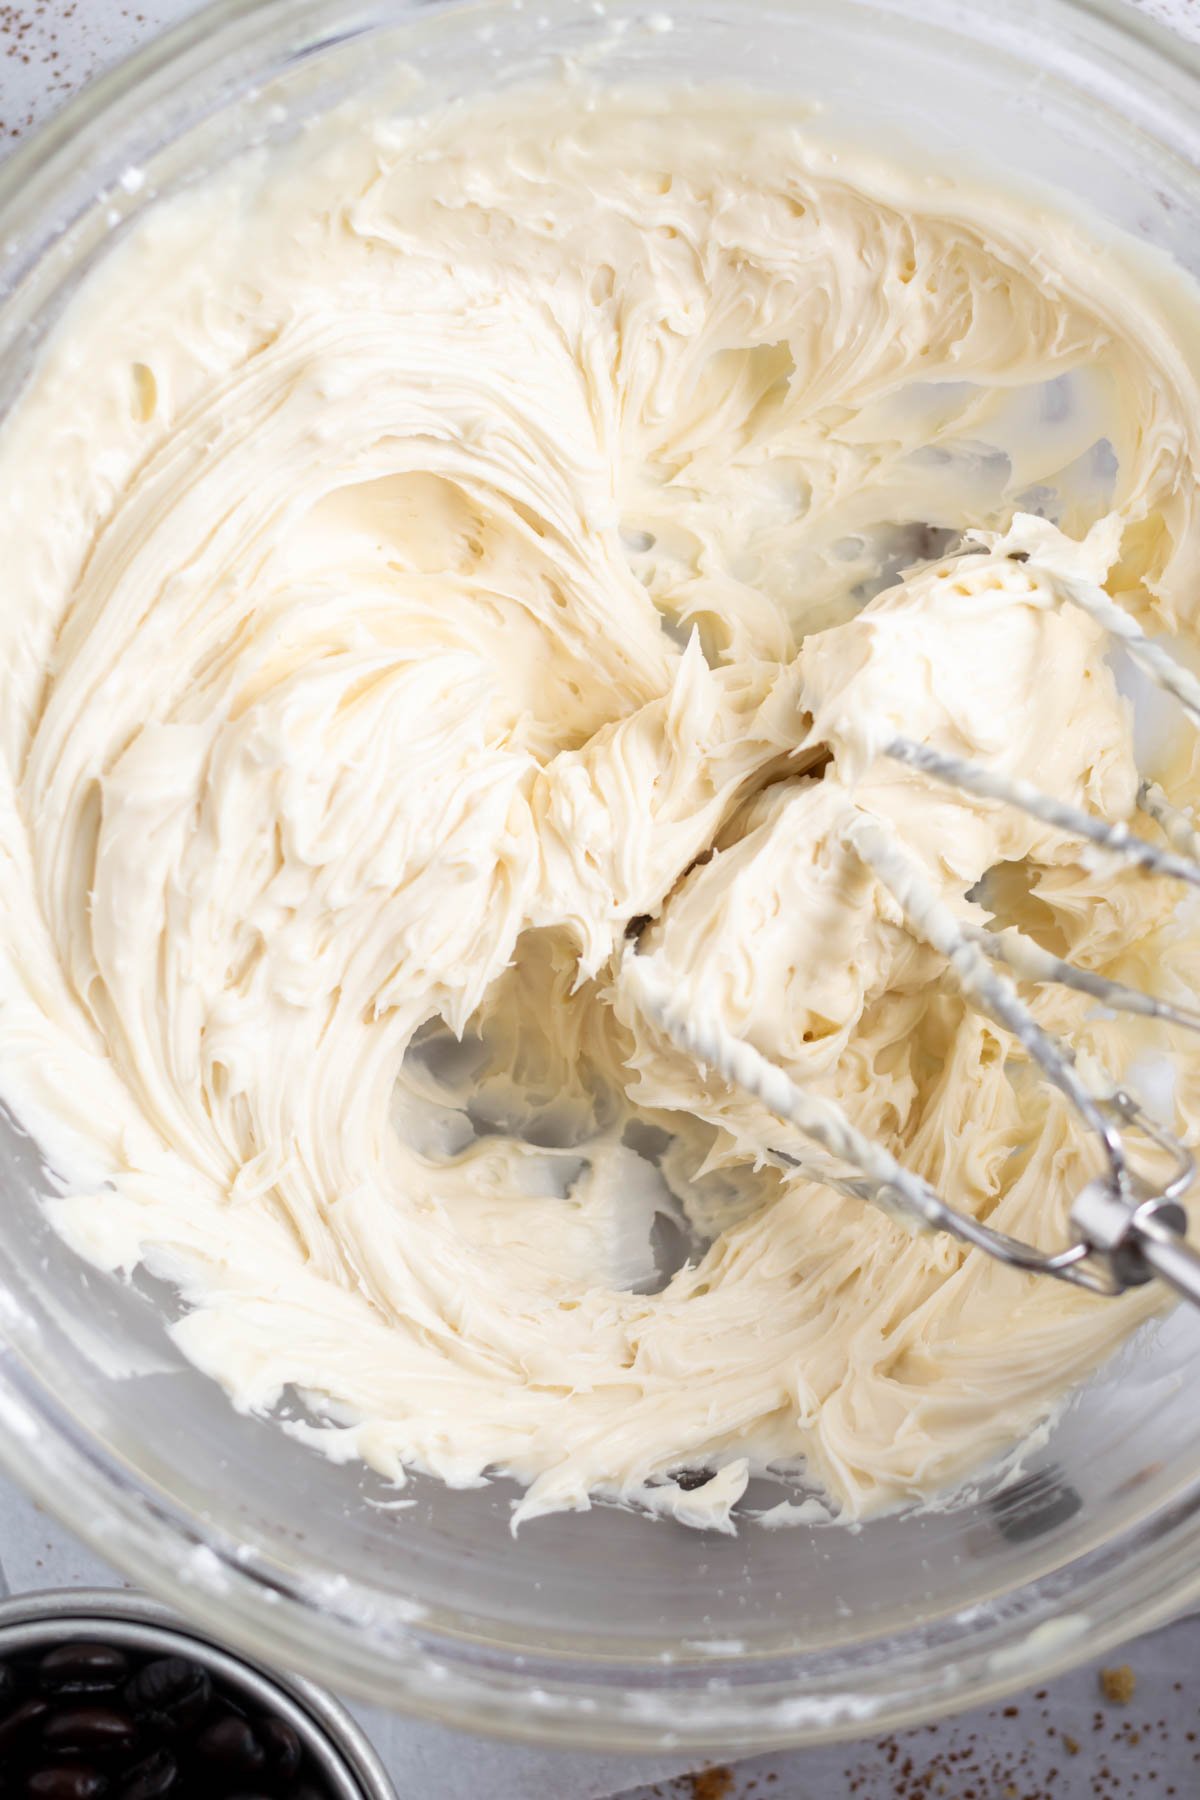 mascarpone, confectioners' sugar and kahlua creamed together with a hand mixer